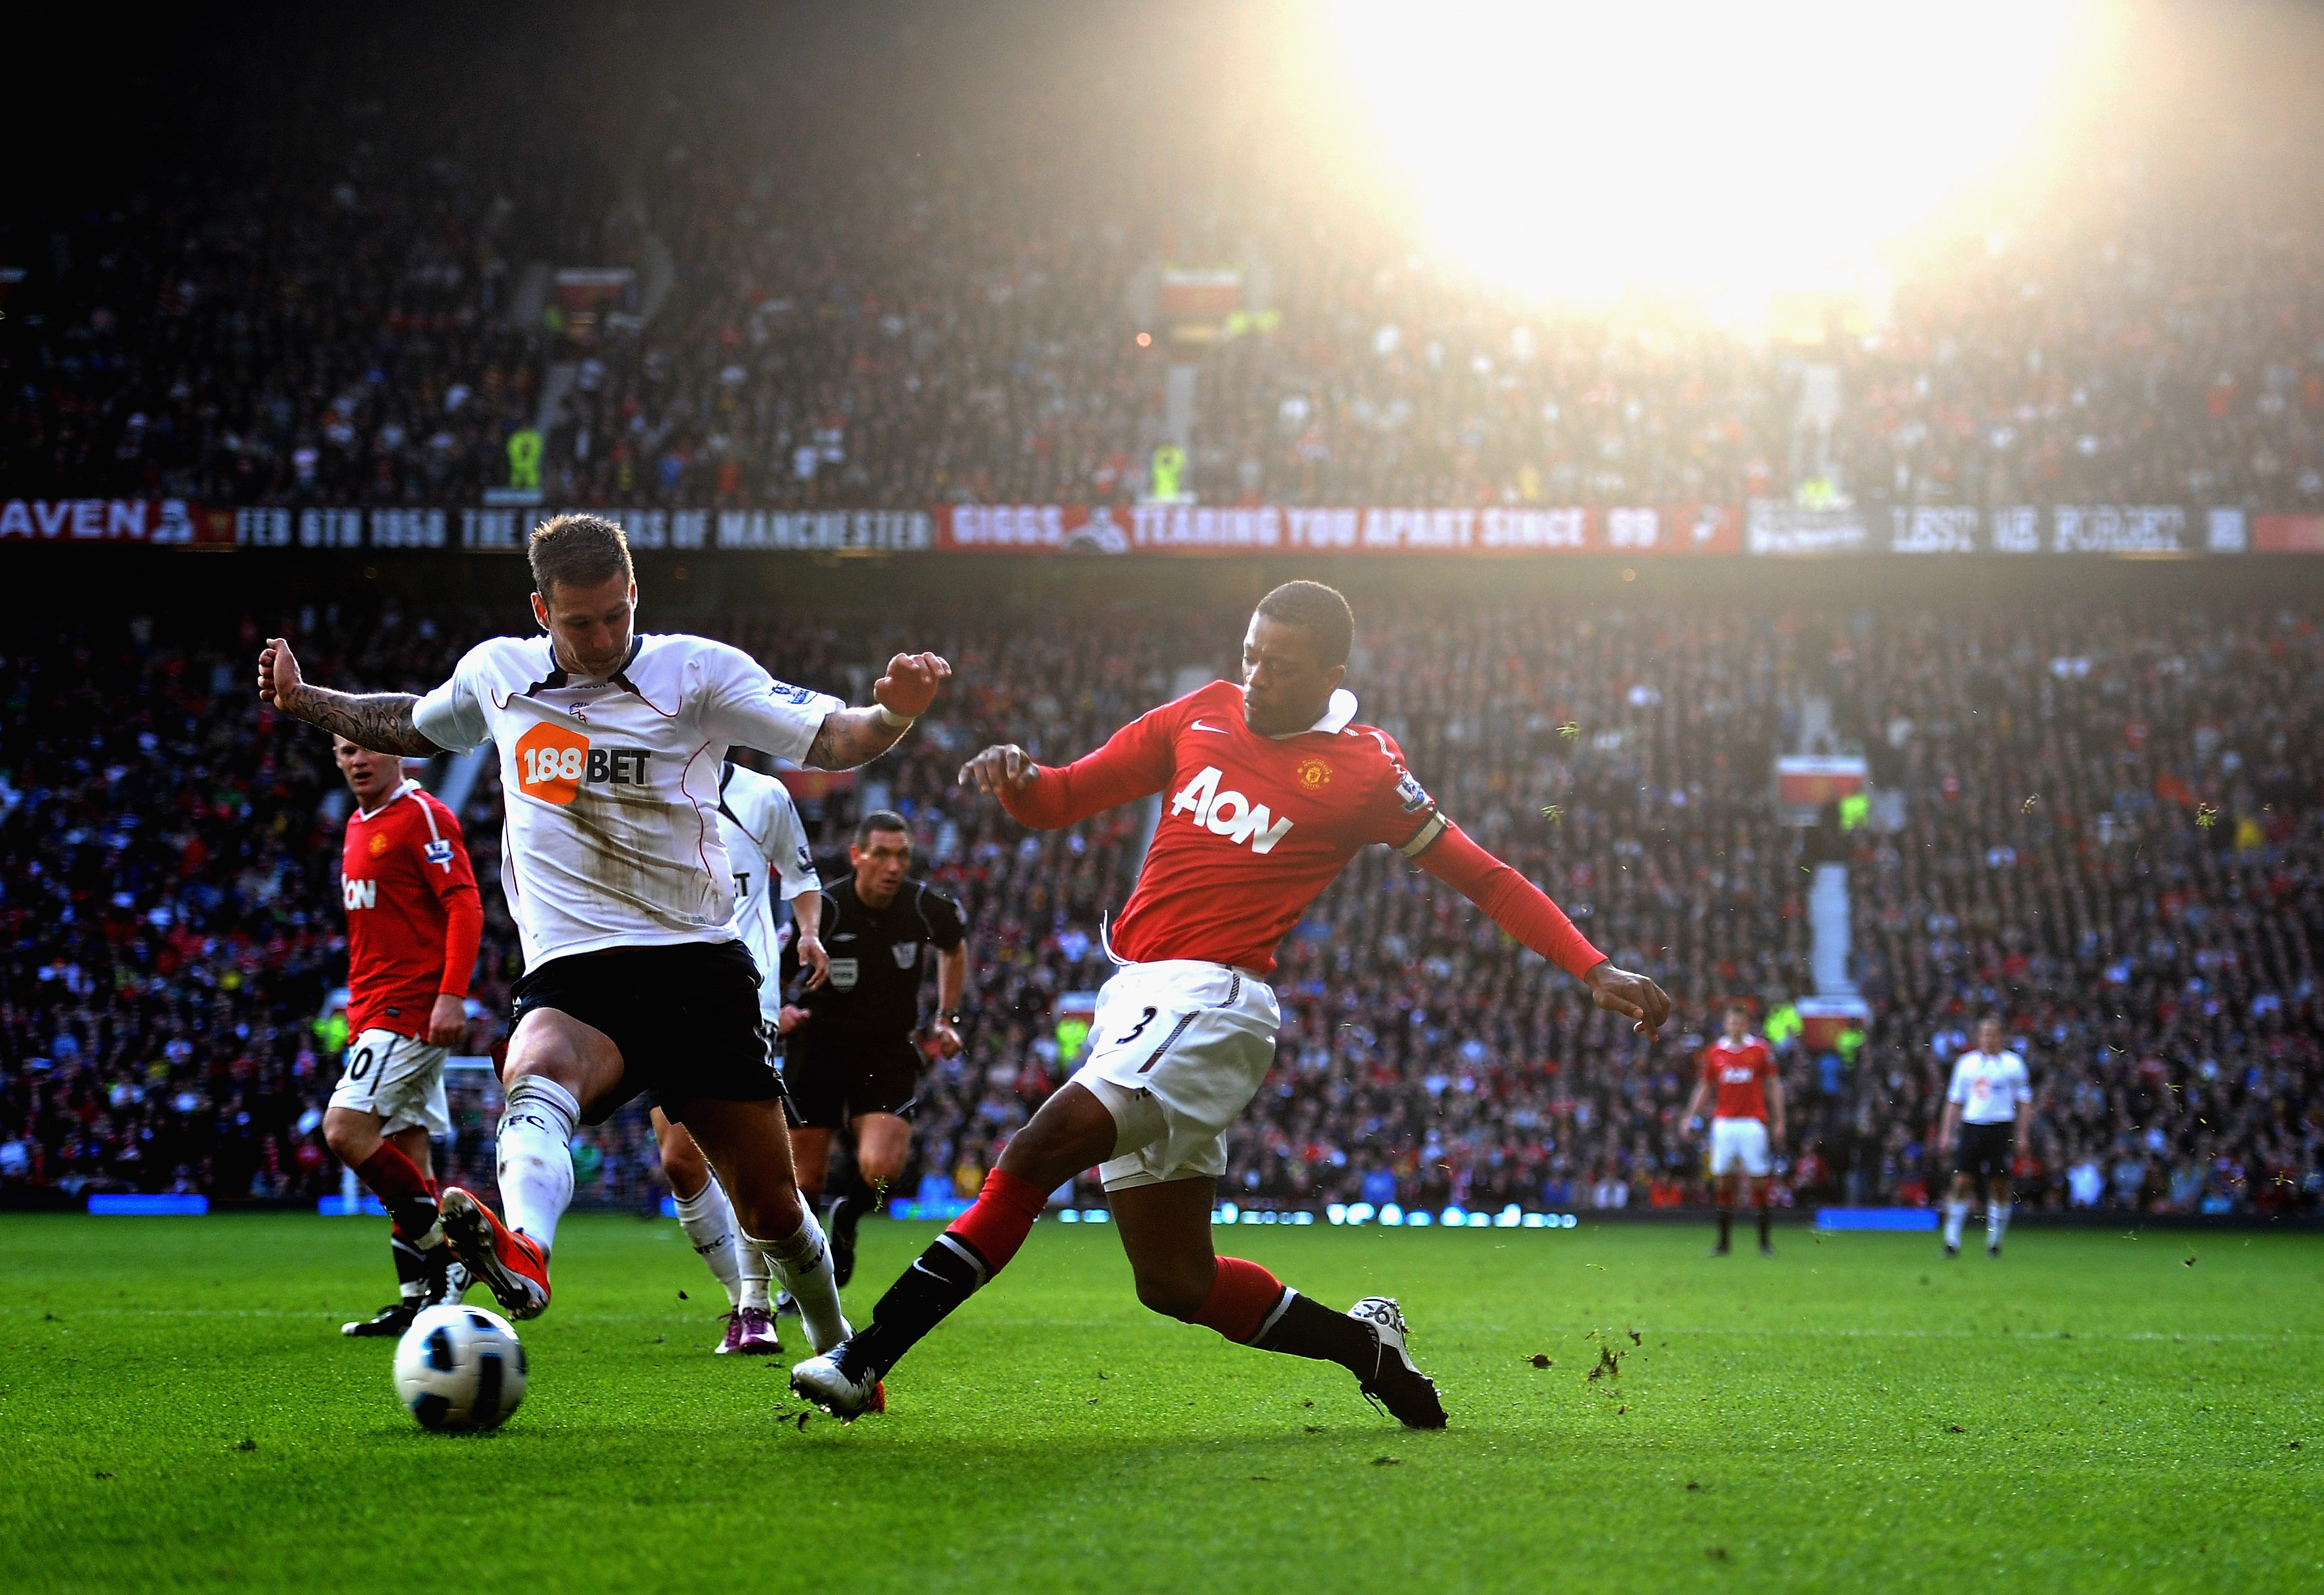 MANCHESTER, ENGLAND - MARCH 19: Patrice Evra of Manchester United battles with Gretar Rafn Steinsson of Bolton Wanderers during the Barclays Premier League match between Manchester United and Bolton Wanderers at Old Trafford on March 19, 2011 in Mancheste